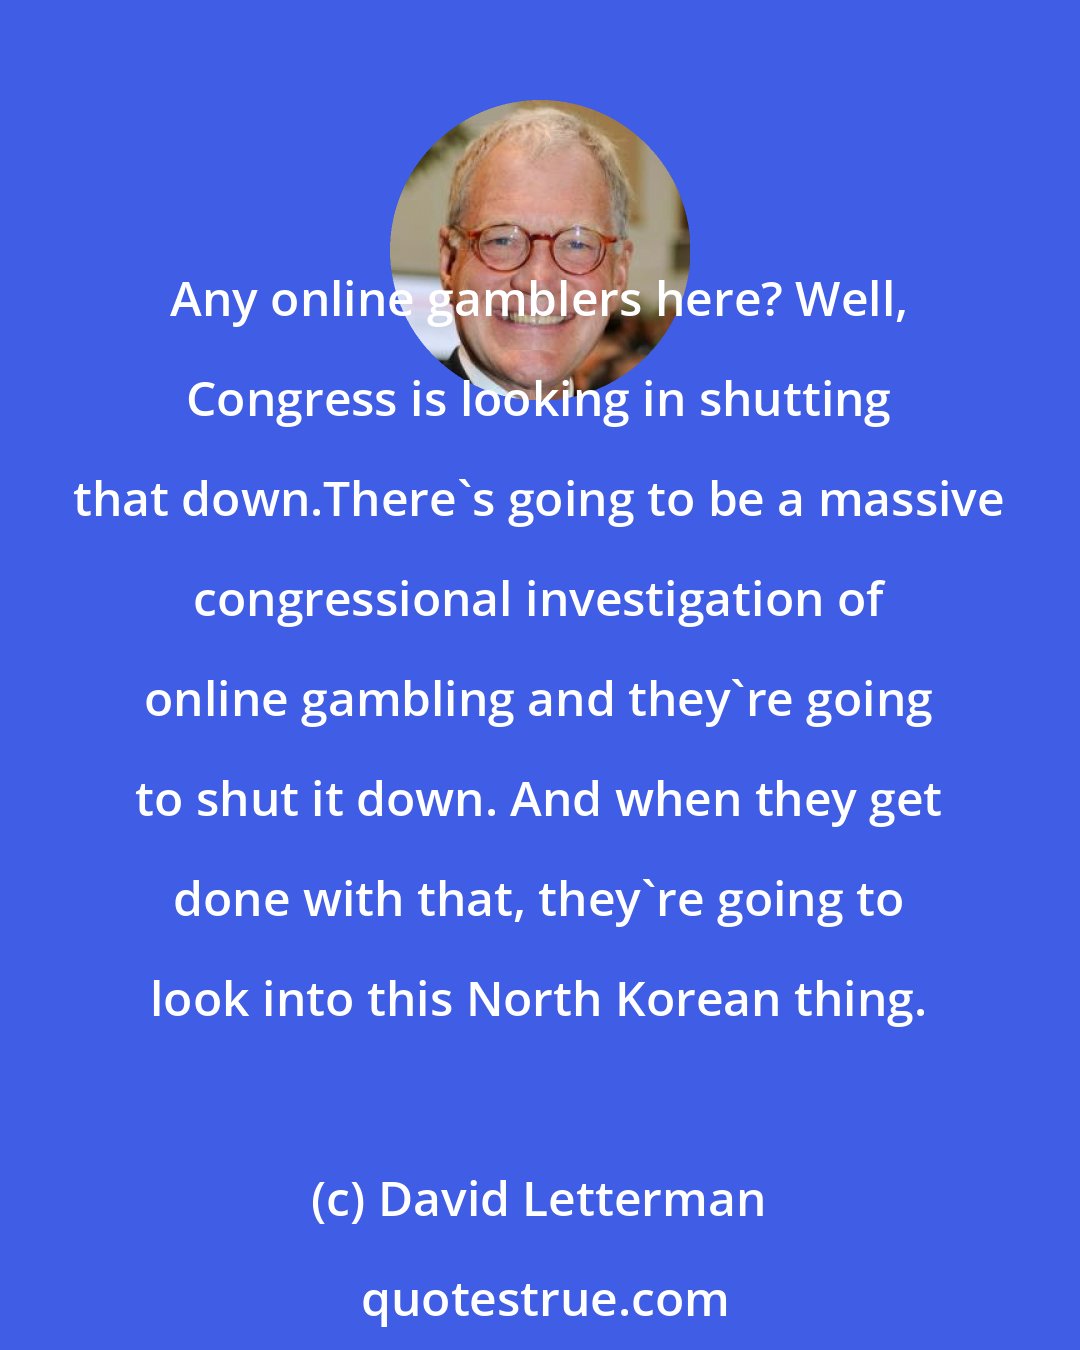 David Letterman: Any online gamblers here? Well, Congress is looking in shutting that down.There's going to be a massive congressional investigation of online gambling and they're going to shut it down. And when they get done with that, they're going to look into this North Korean thing.